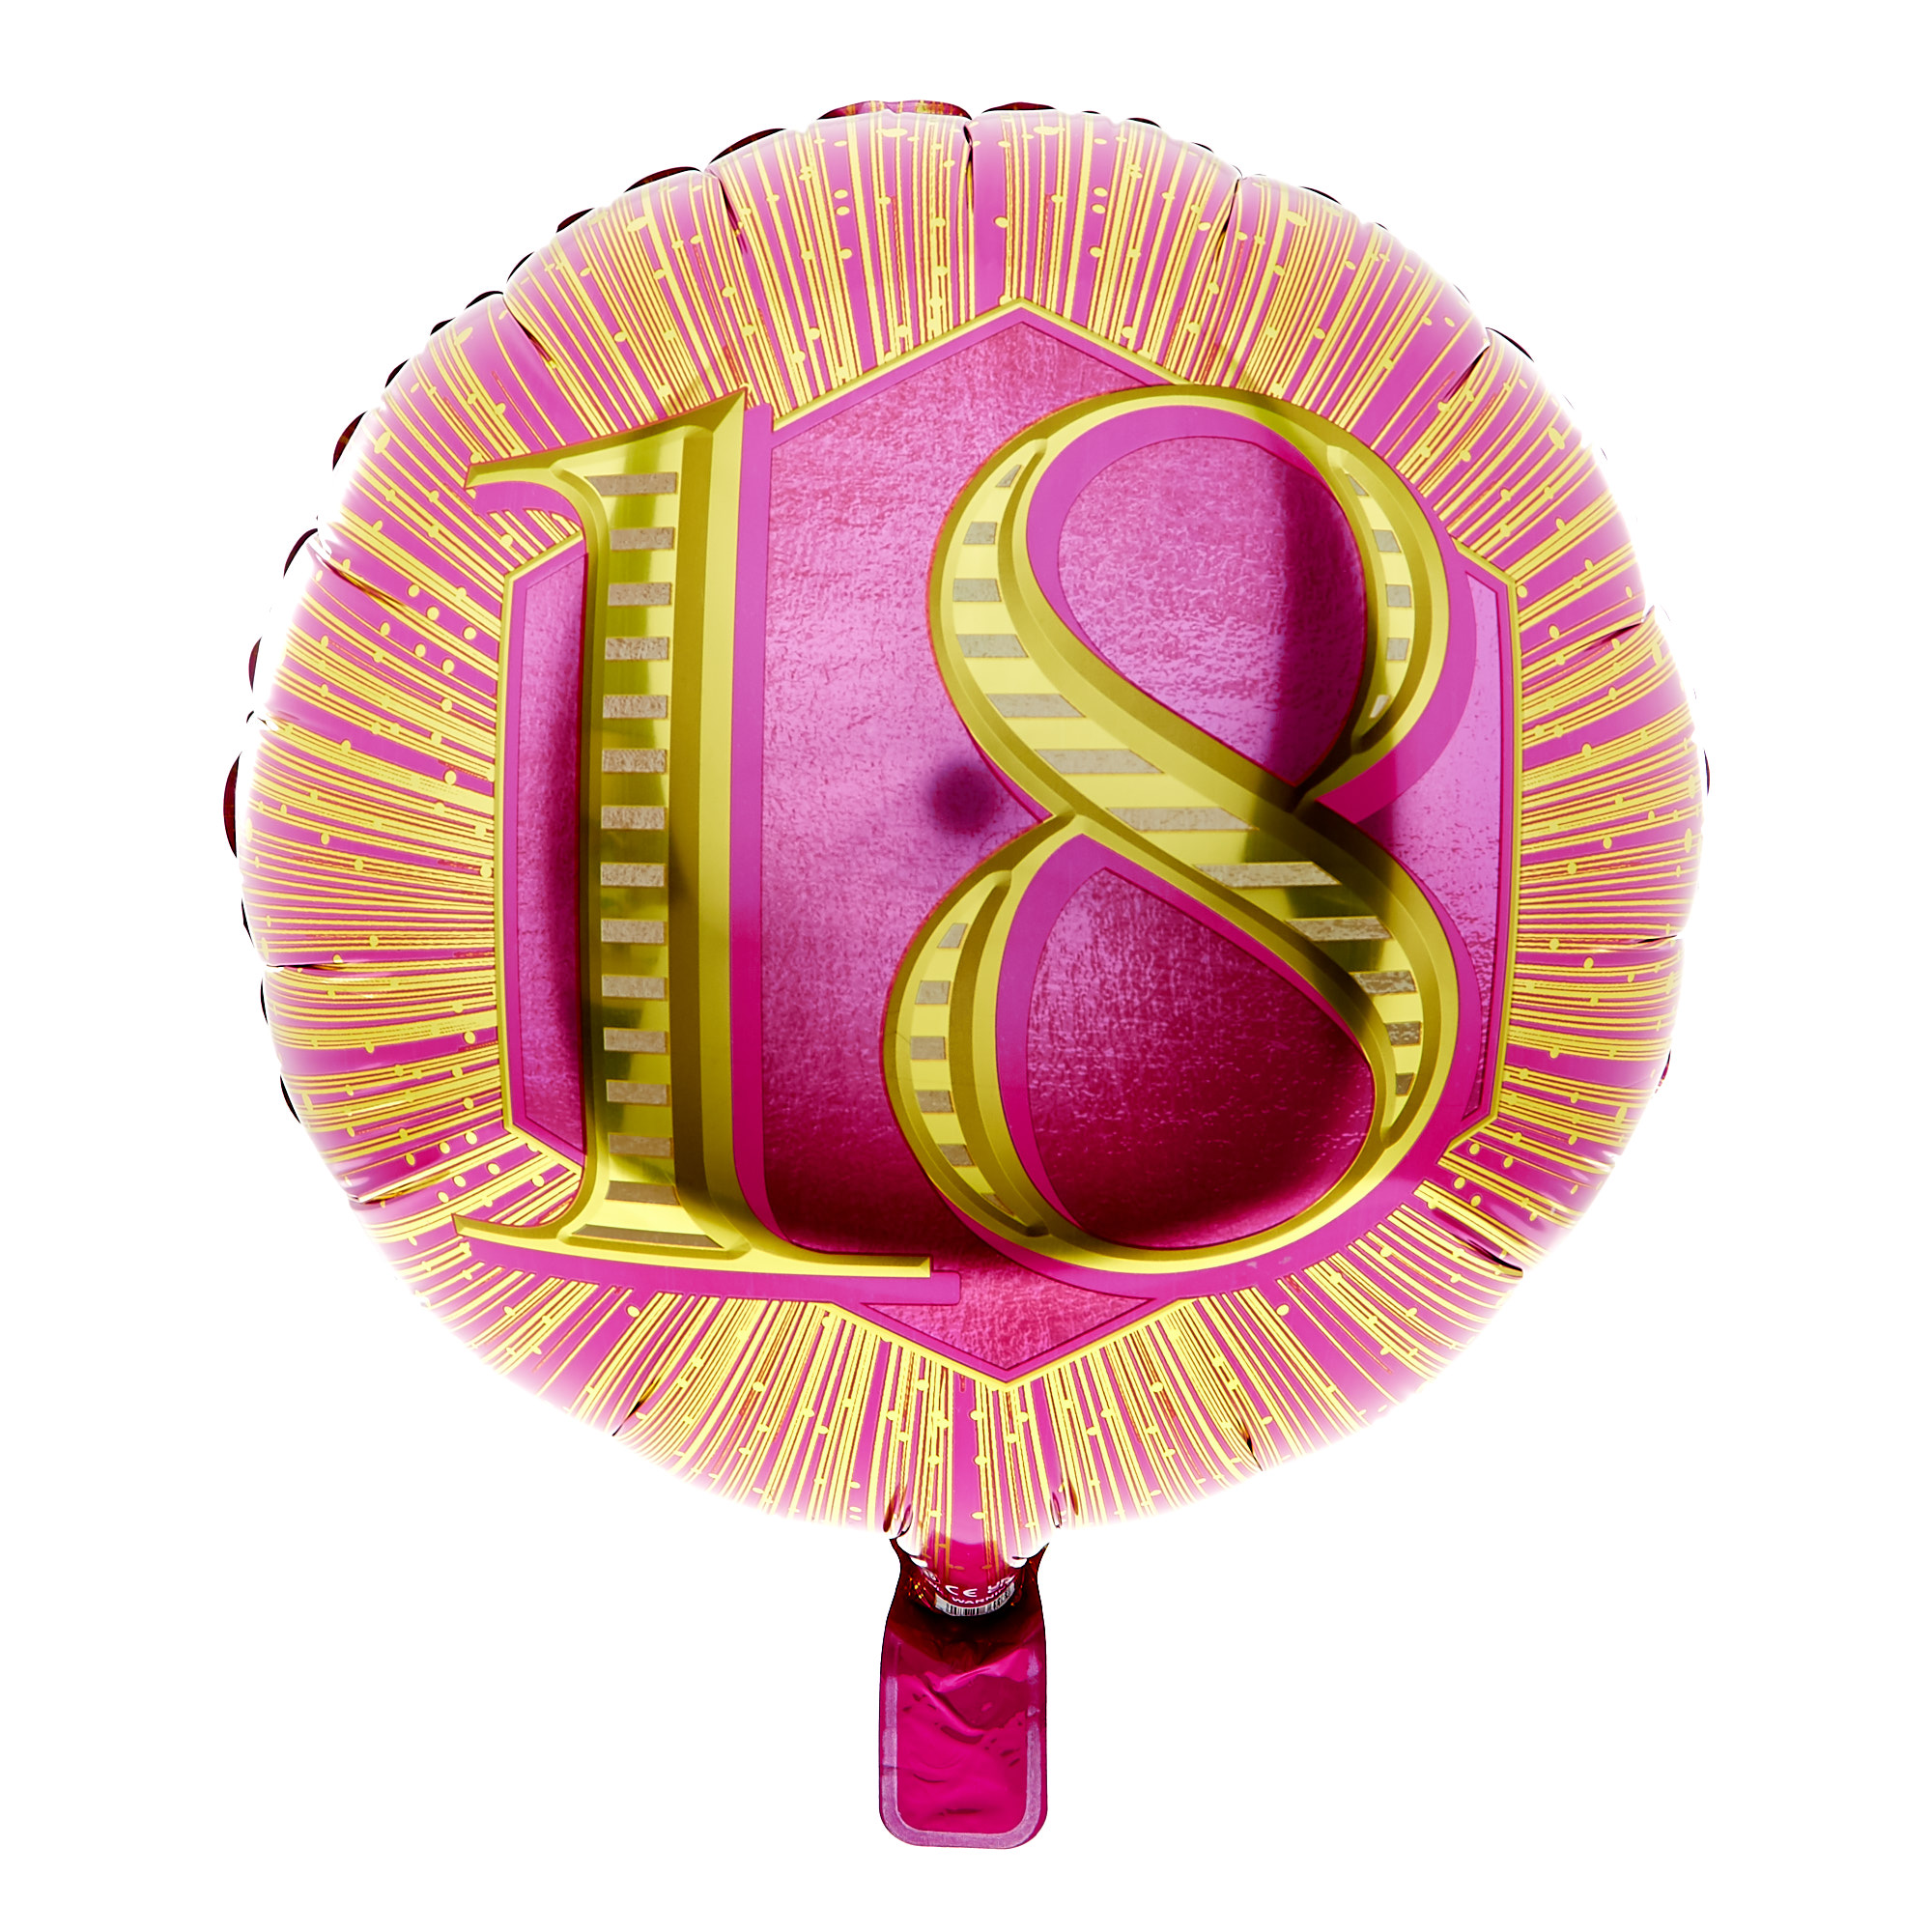 Pink & Gold 18th Birthday Balloon Bouquet - DELIVERED INFLATED!